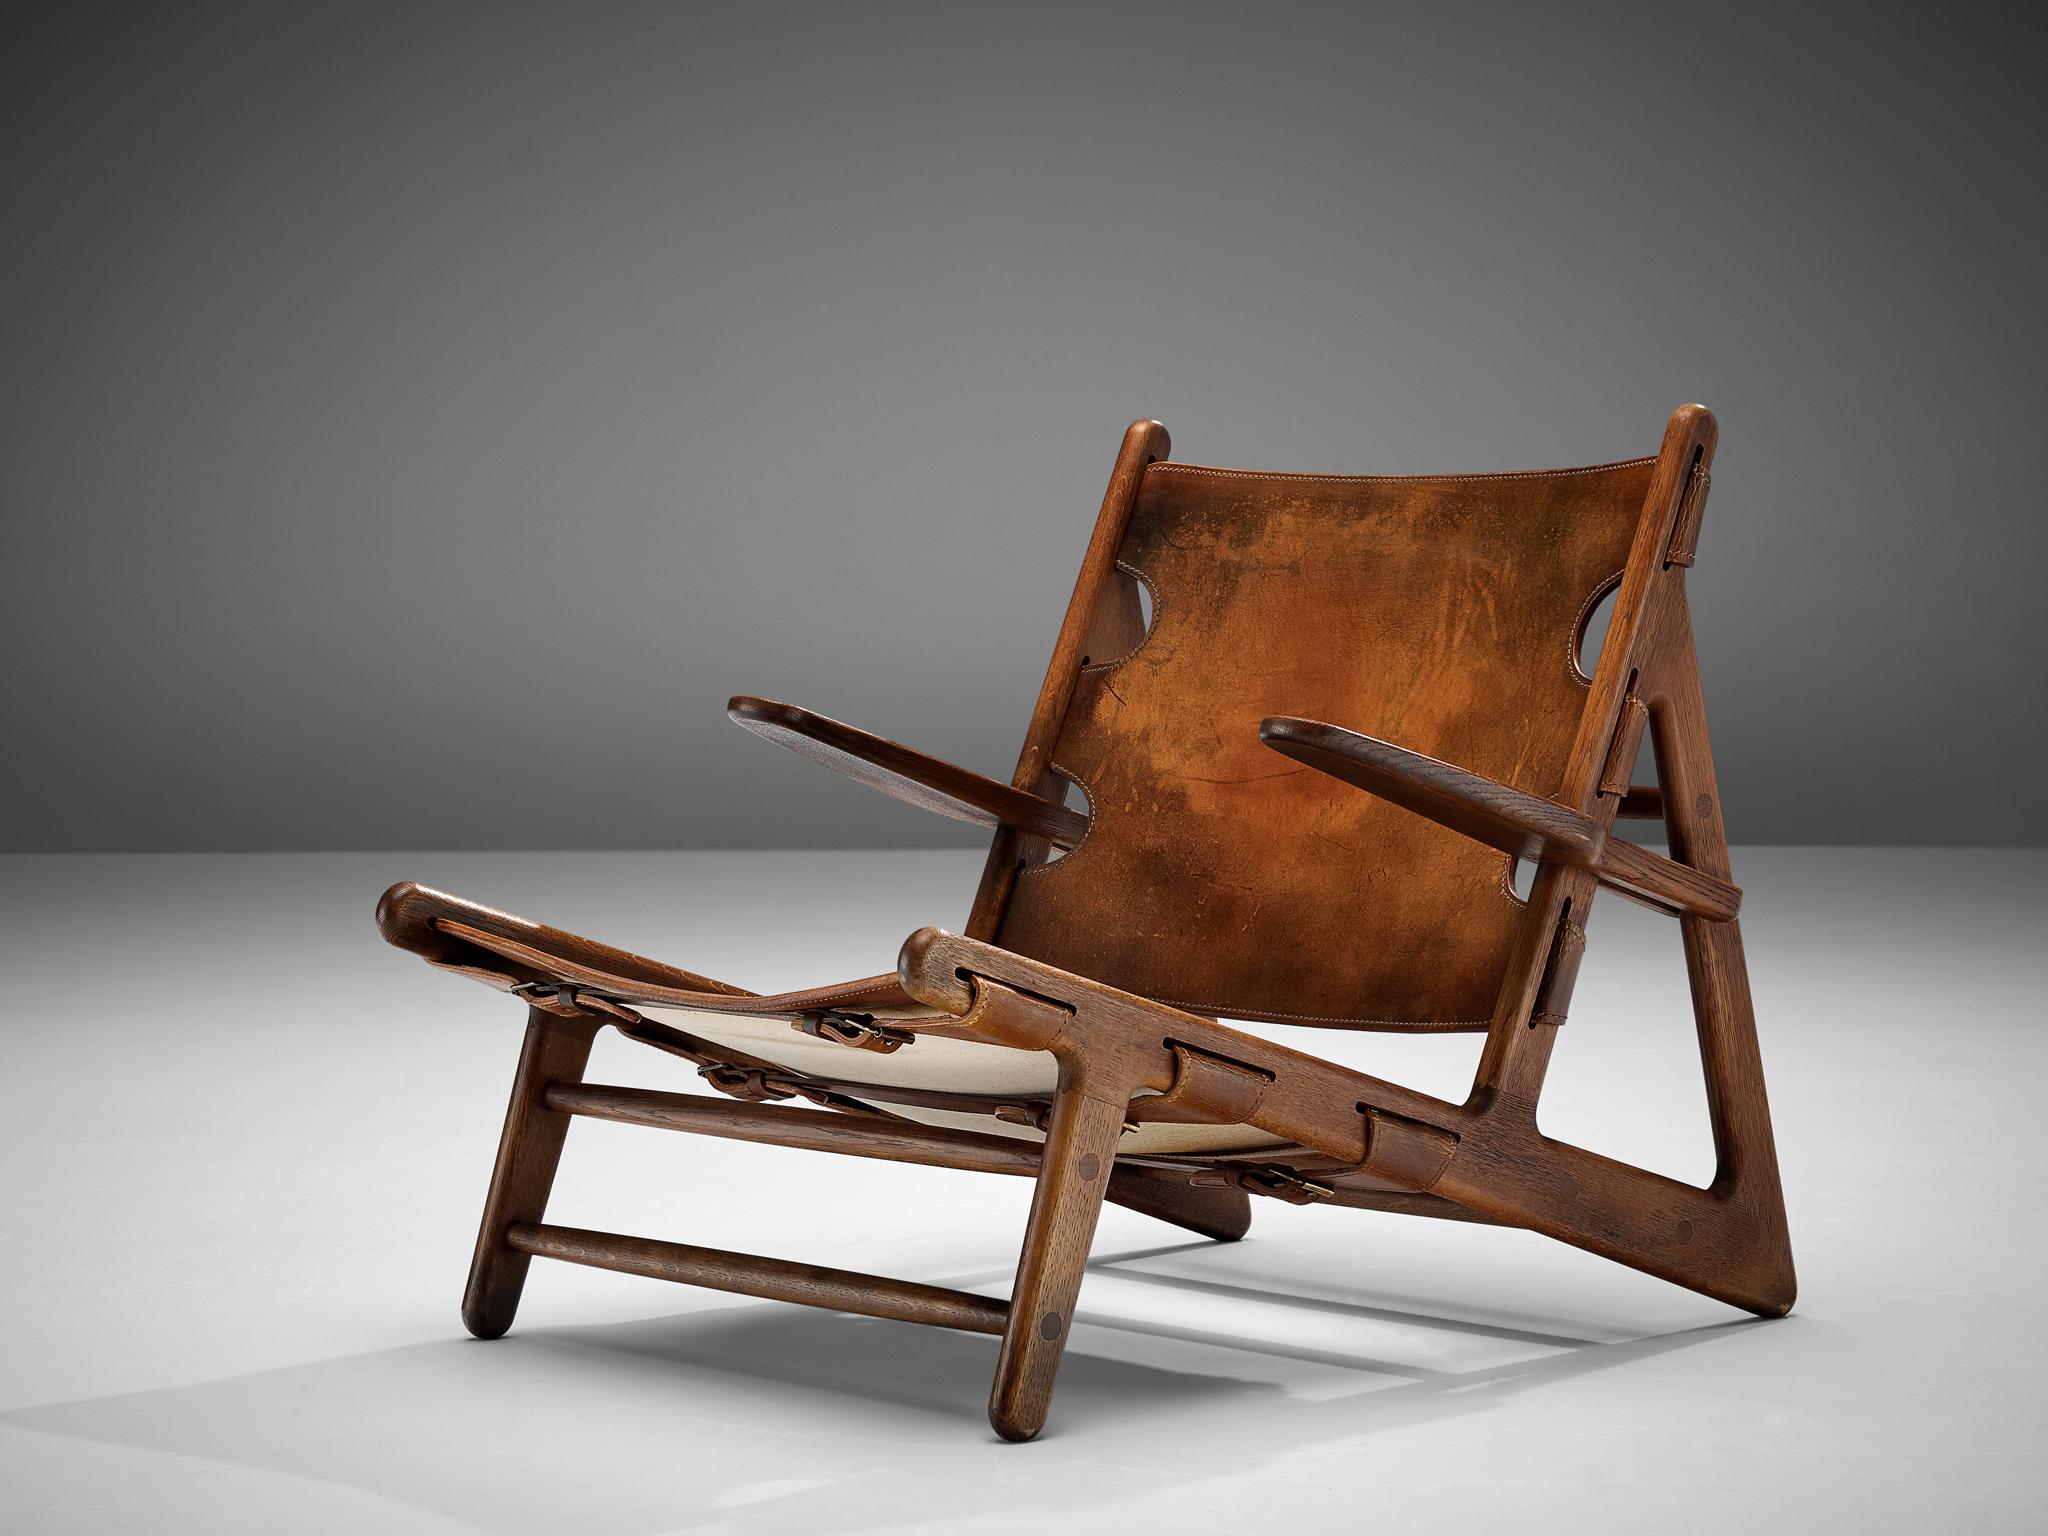 Børge Mogensen, 'Hunting Chair', model 2229, patinated leather, darkened oak, brass, Denmark, designed 1950

Hunting chair, designed by Børge Mogensen in 1950 for the Cabinetmakers Guild Exhibition. The theme of the exhibition was 'Huntin Cabin'.